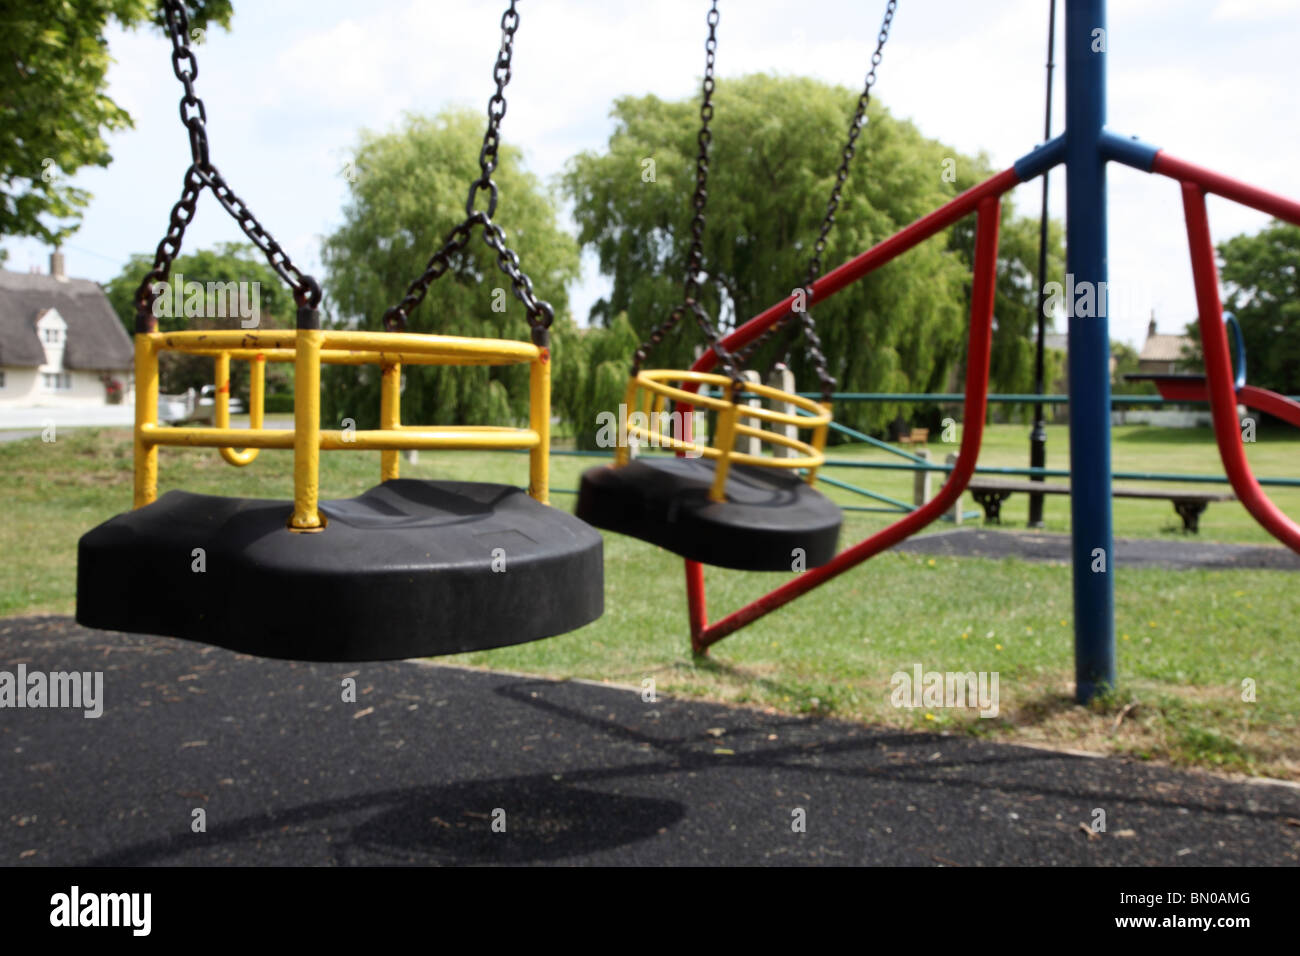 Empty swings in a child's playground, movement on one swing Stock Photo